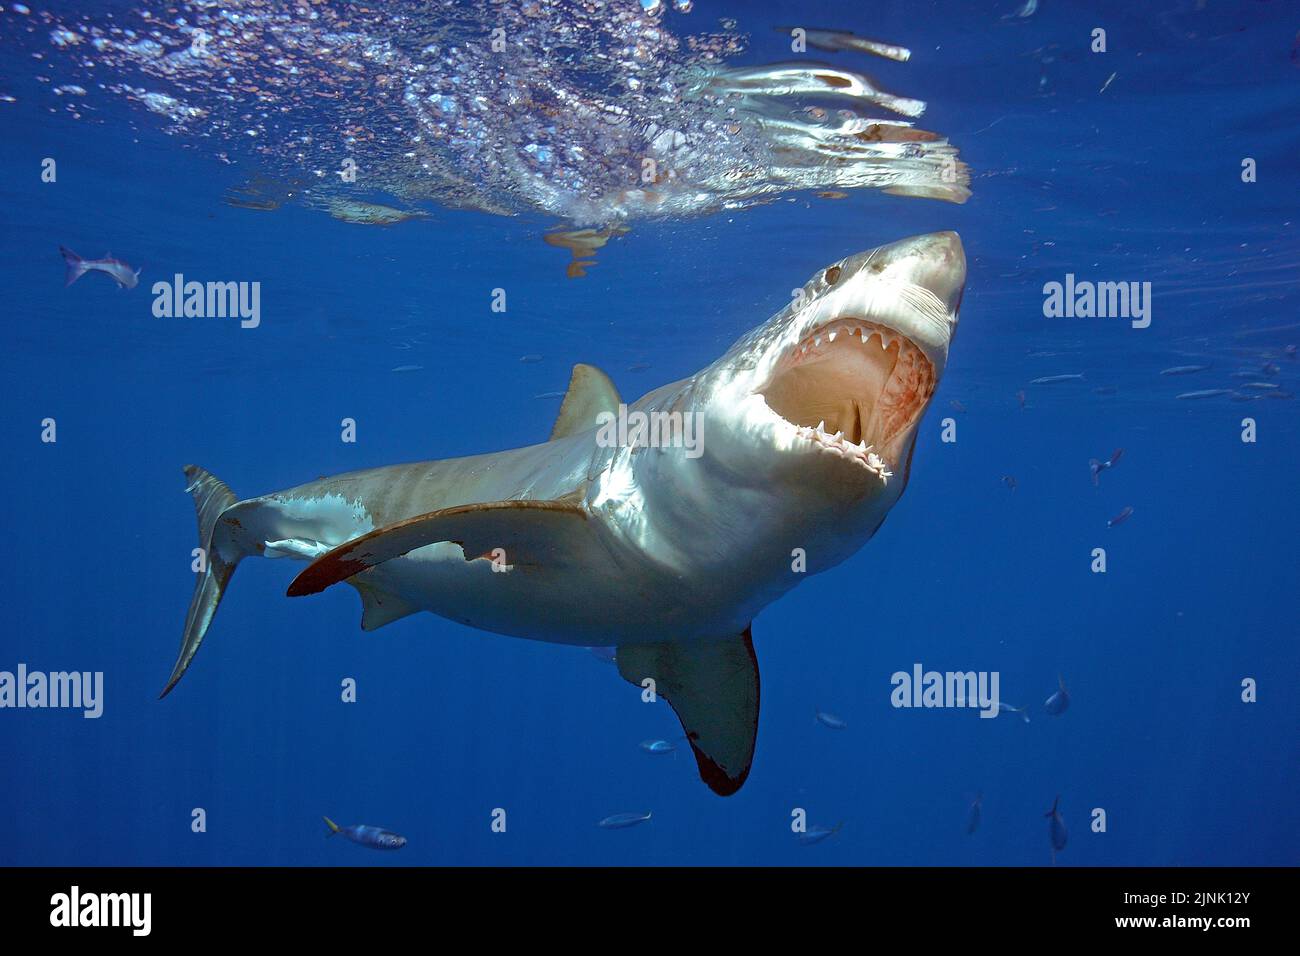 Great white shark (Carcharodon carcharias) with open mouth, Guadalupe Island, Mexico, Pacific Ocean Stock Photo